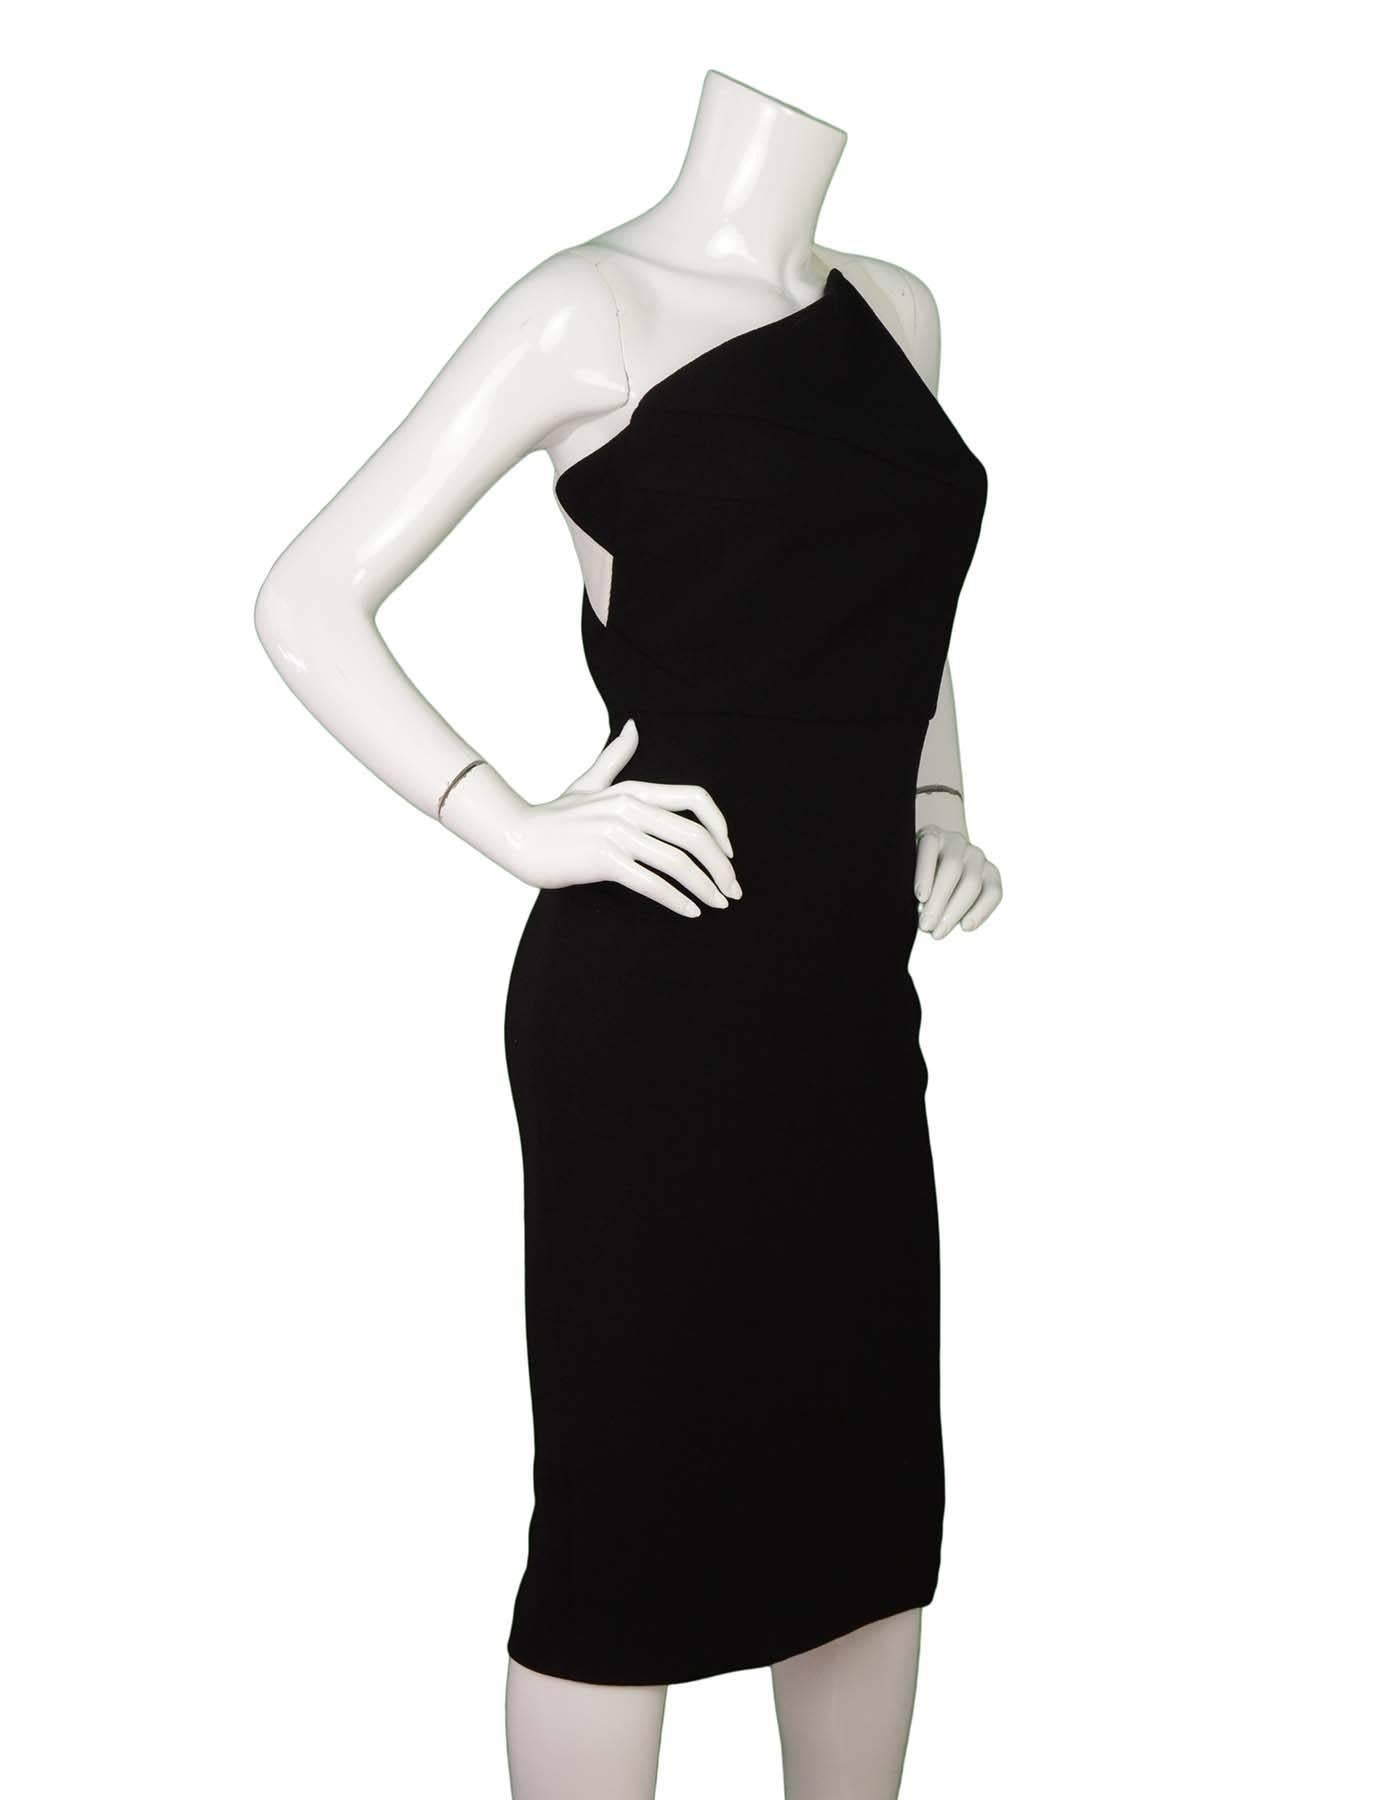 Roland Mouret Wool One-Shoulder Cocktail Dress 
Features white trim down side
Made In: U.K.
Color: Black and white
Composition: 100% wool
Lining: Black, 100% silk
Closure/Opening: Back center zipper
Exterior Pockets: None
Interior Pockets: